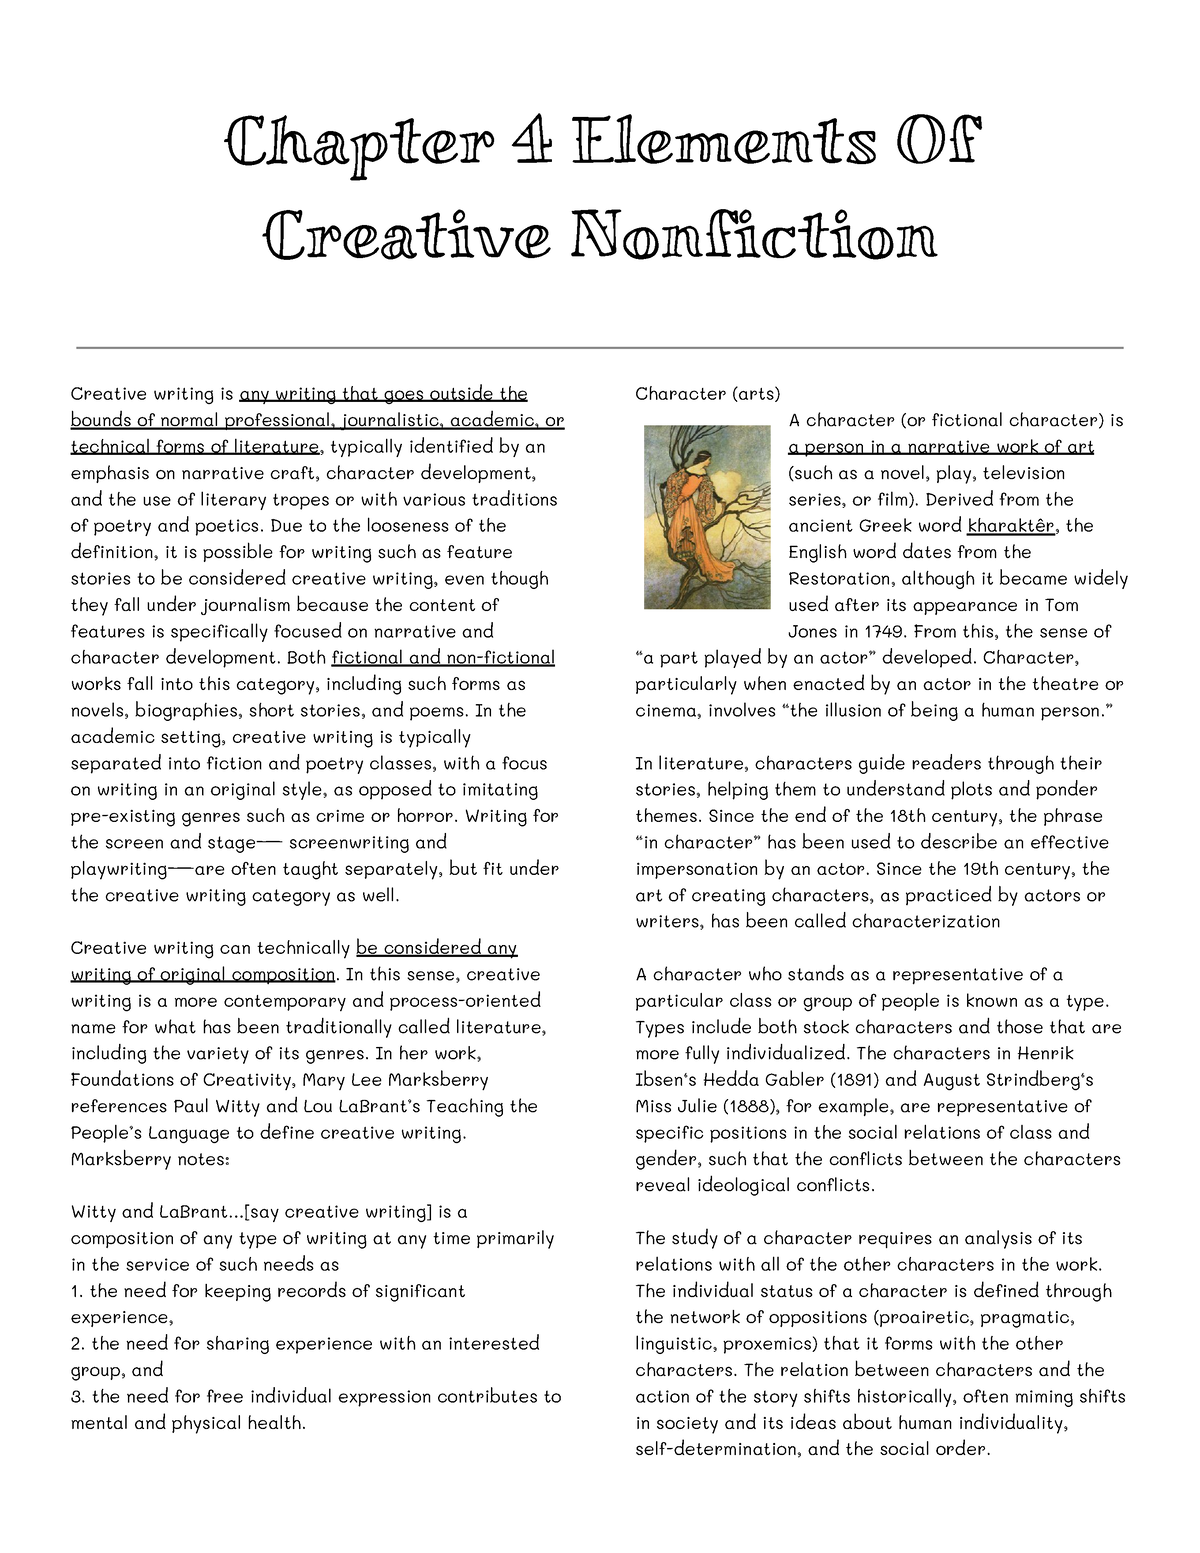 what is the relationship between creative nonfiction and creative writing